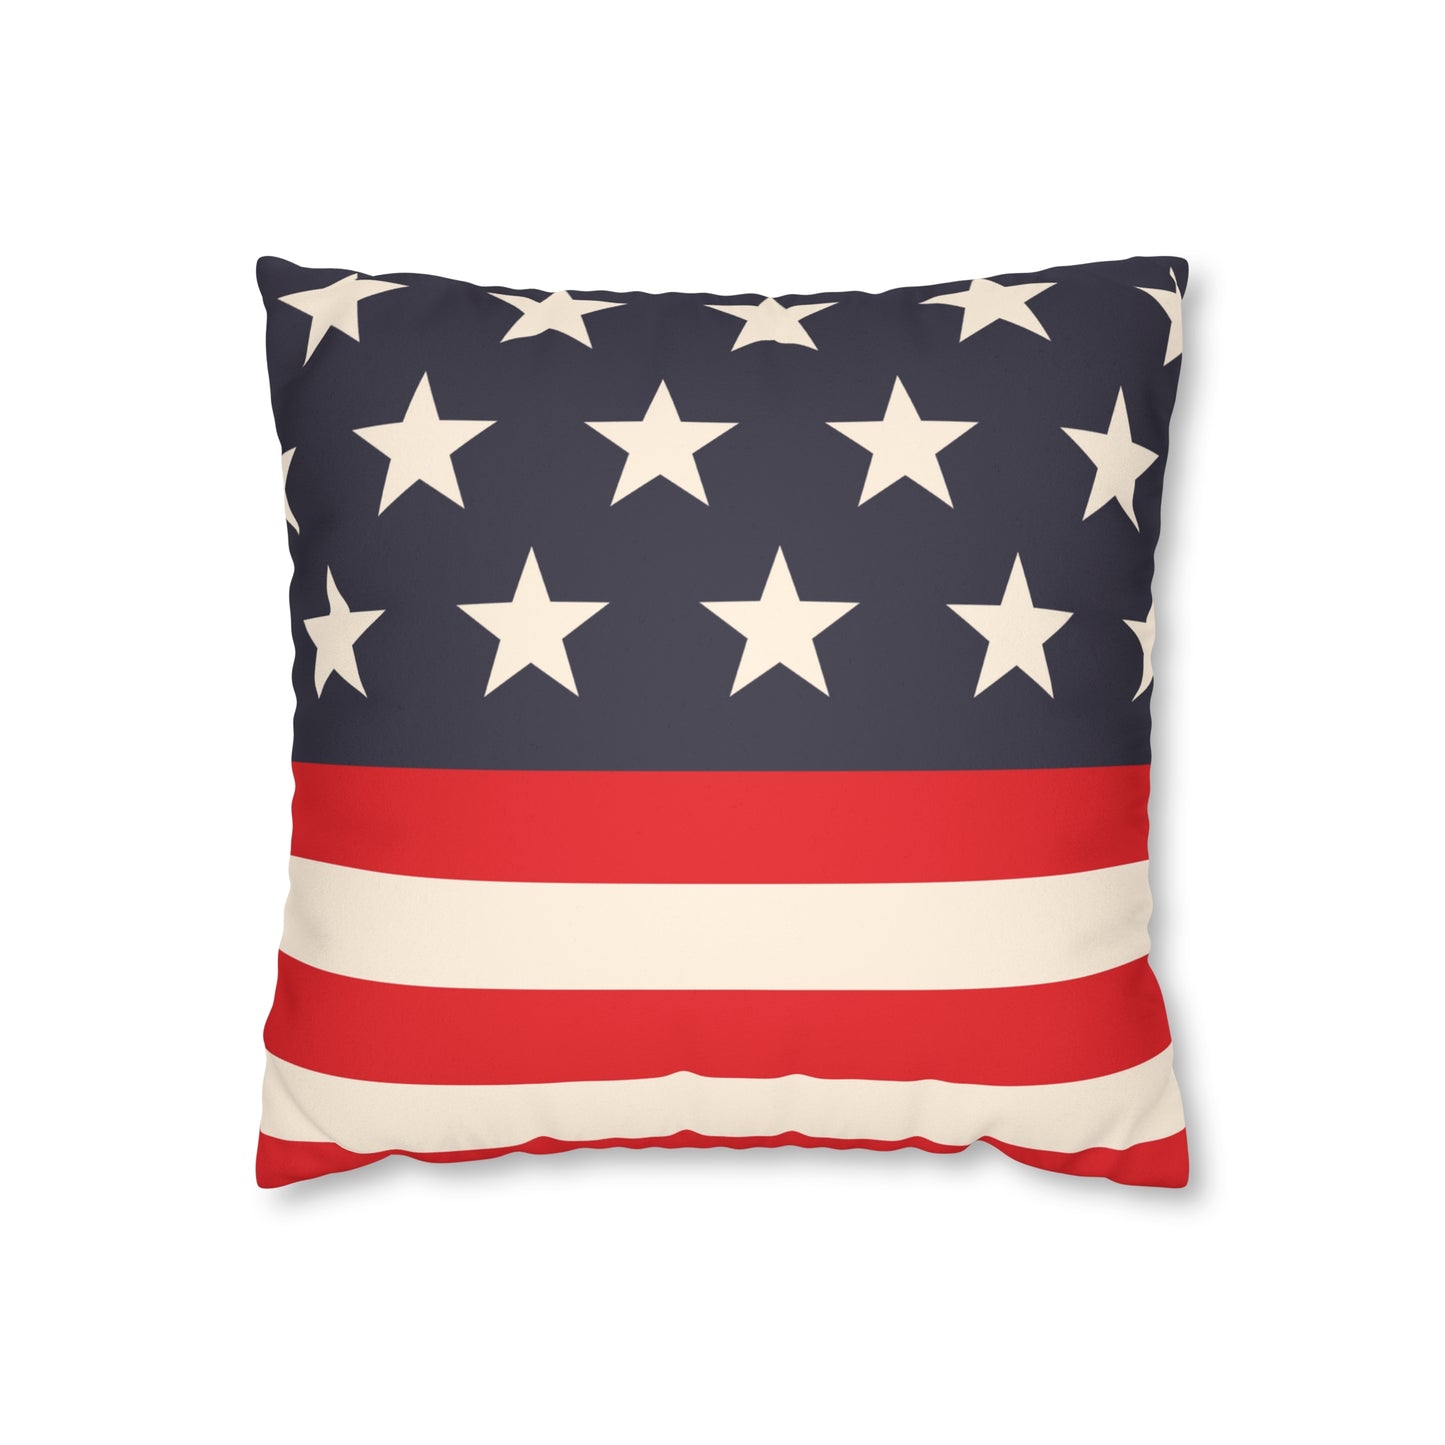 4th of july pillow with red, white and blue stars and stripes for USA independence day decor